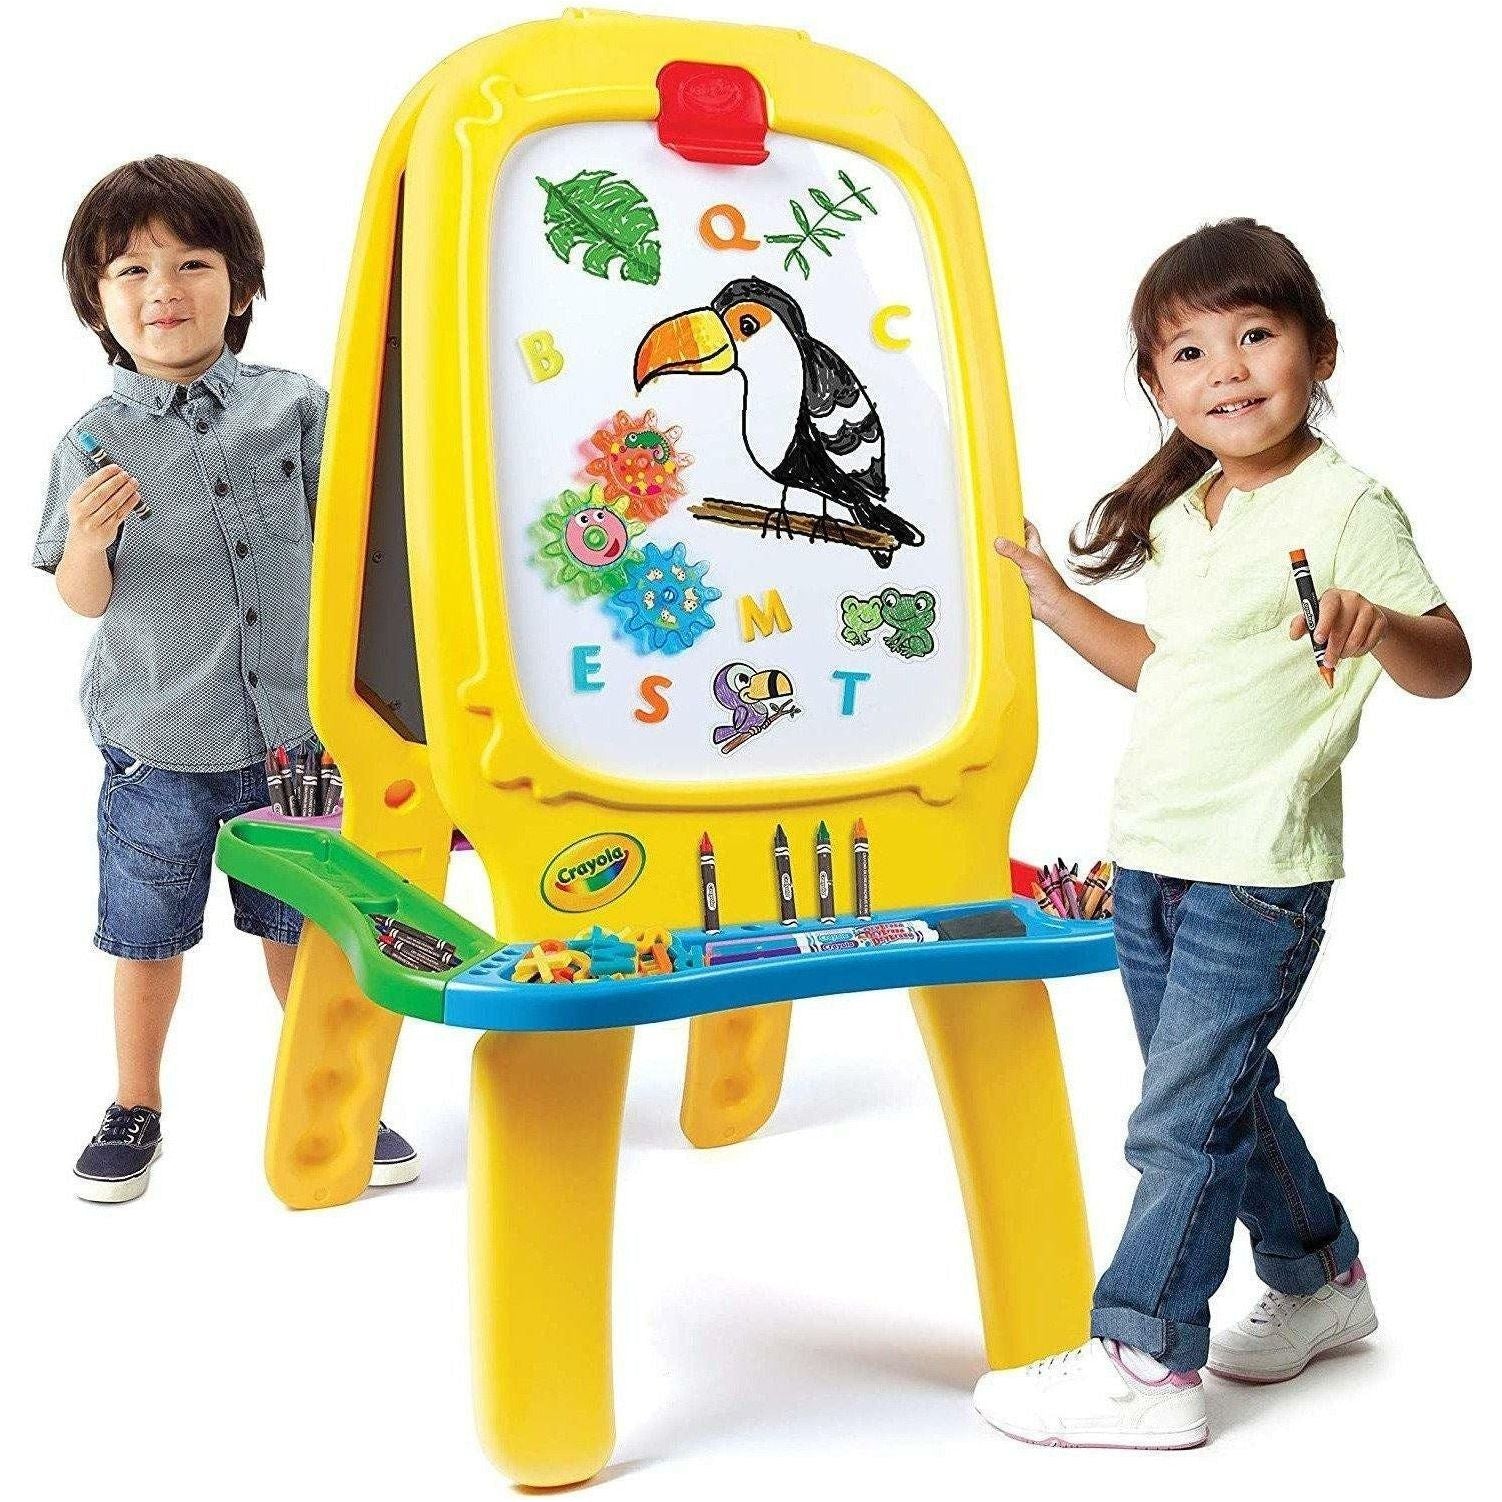 Crayola Deluxe Magnetic Double Whita And Black Board - BumbleToys - 2-4 Years, Blackboards & Easels, Boys, Crayola, Desk, Eagle Plus, Girls, Pre-Order